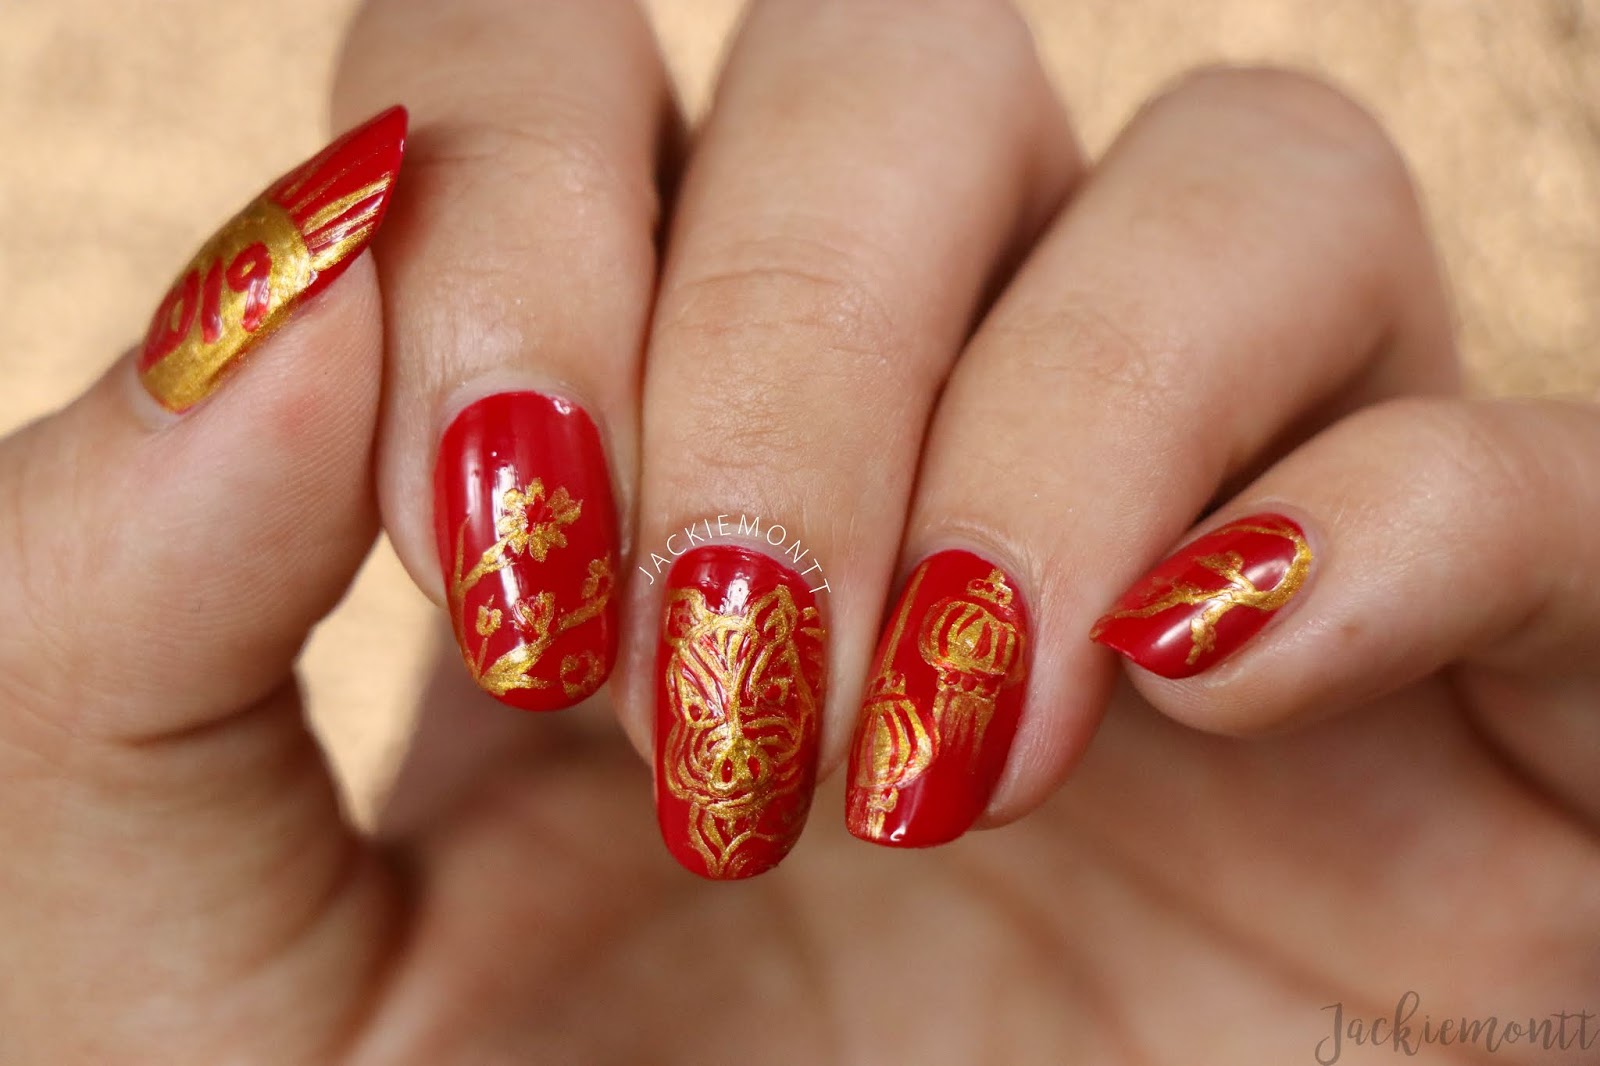 3. Chinese New Year Nail Art with Pig Year Theme - wide 1